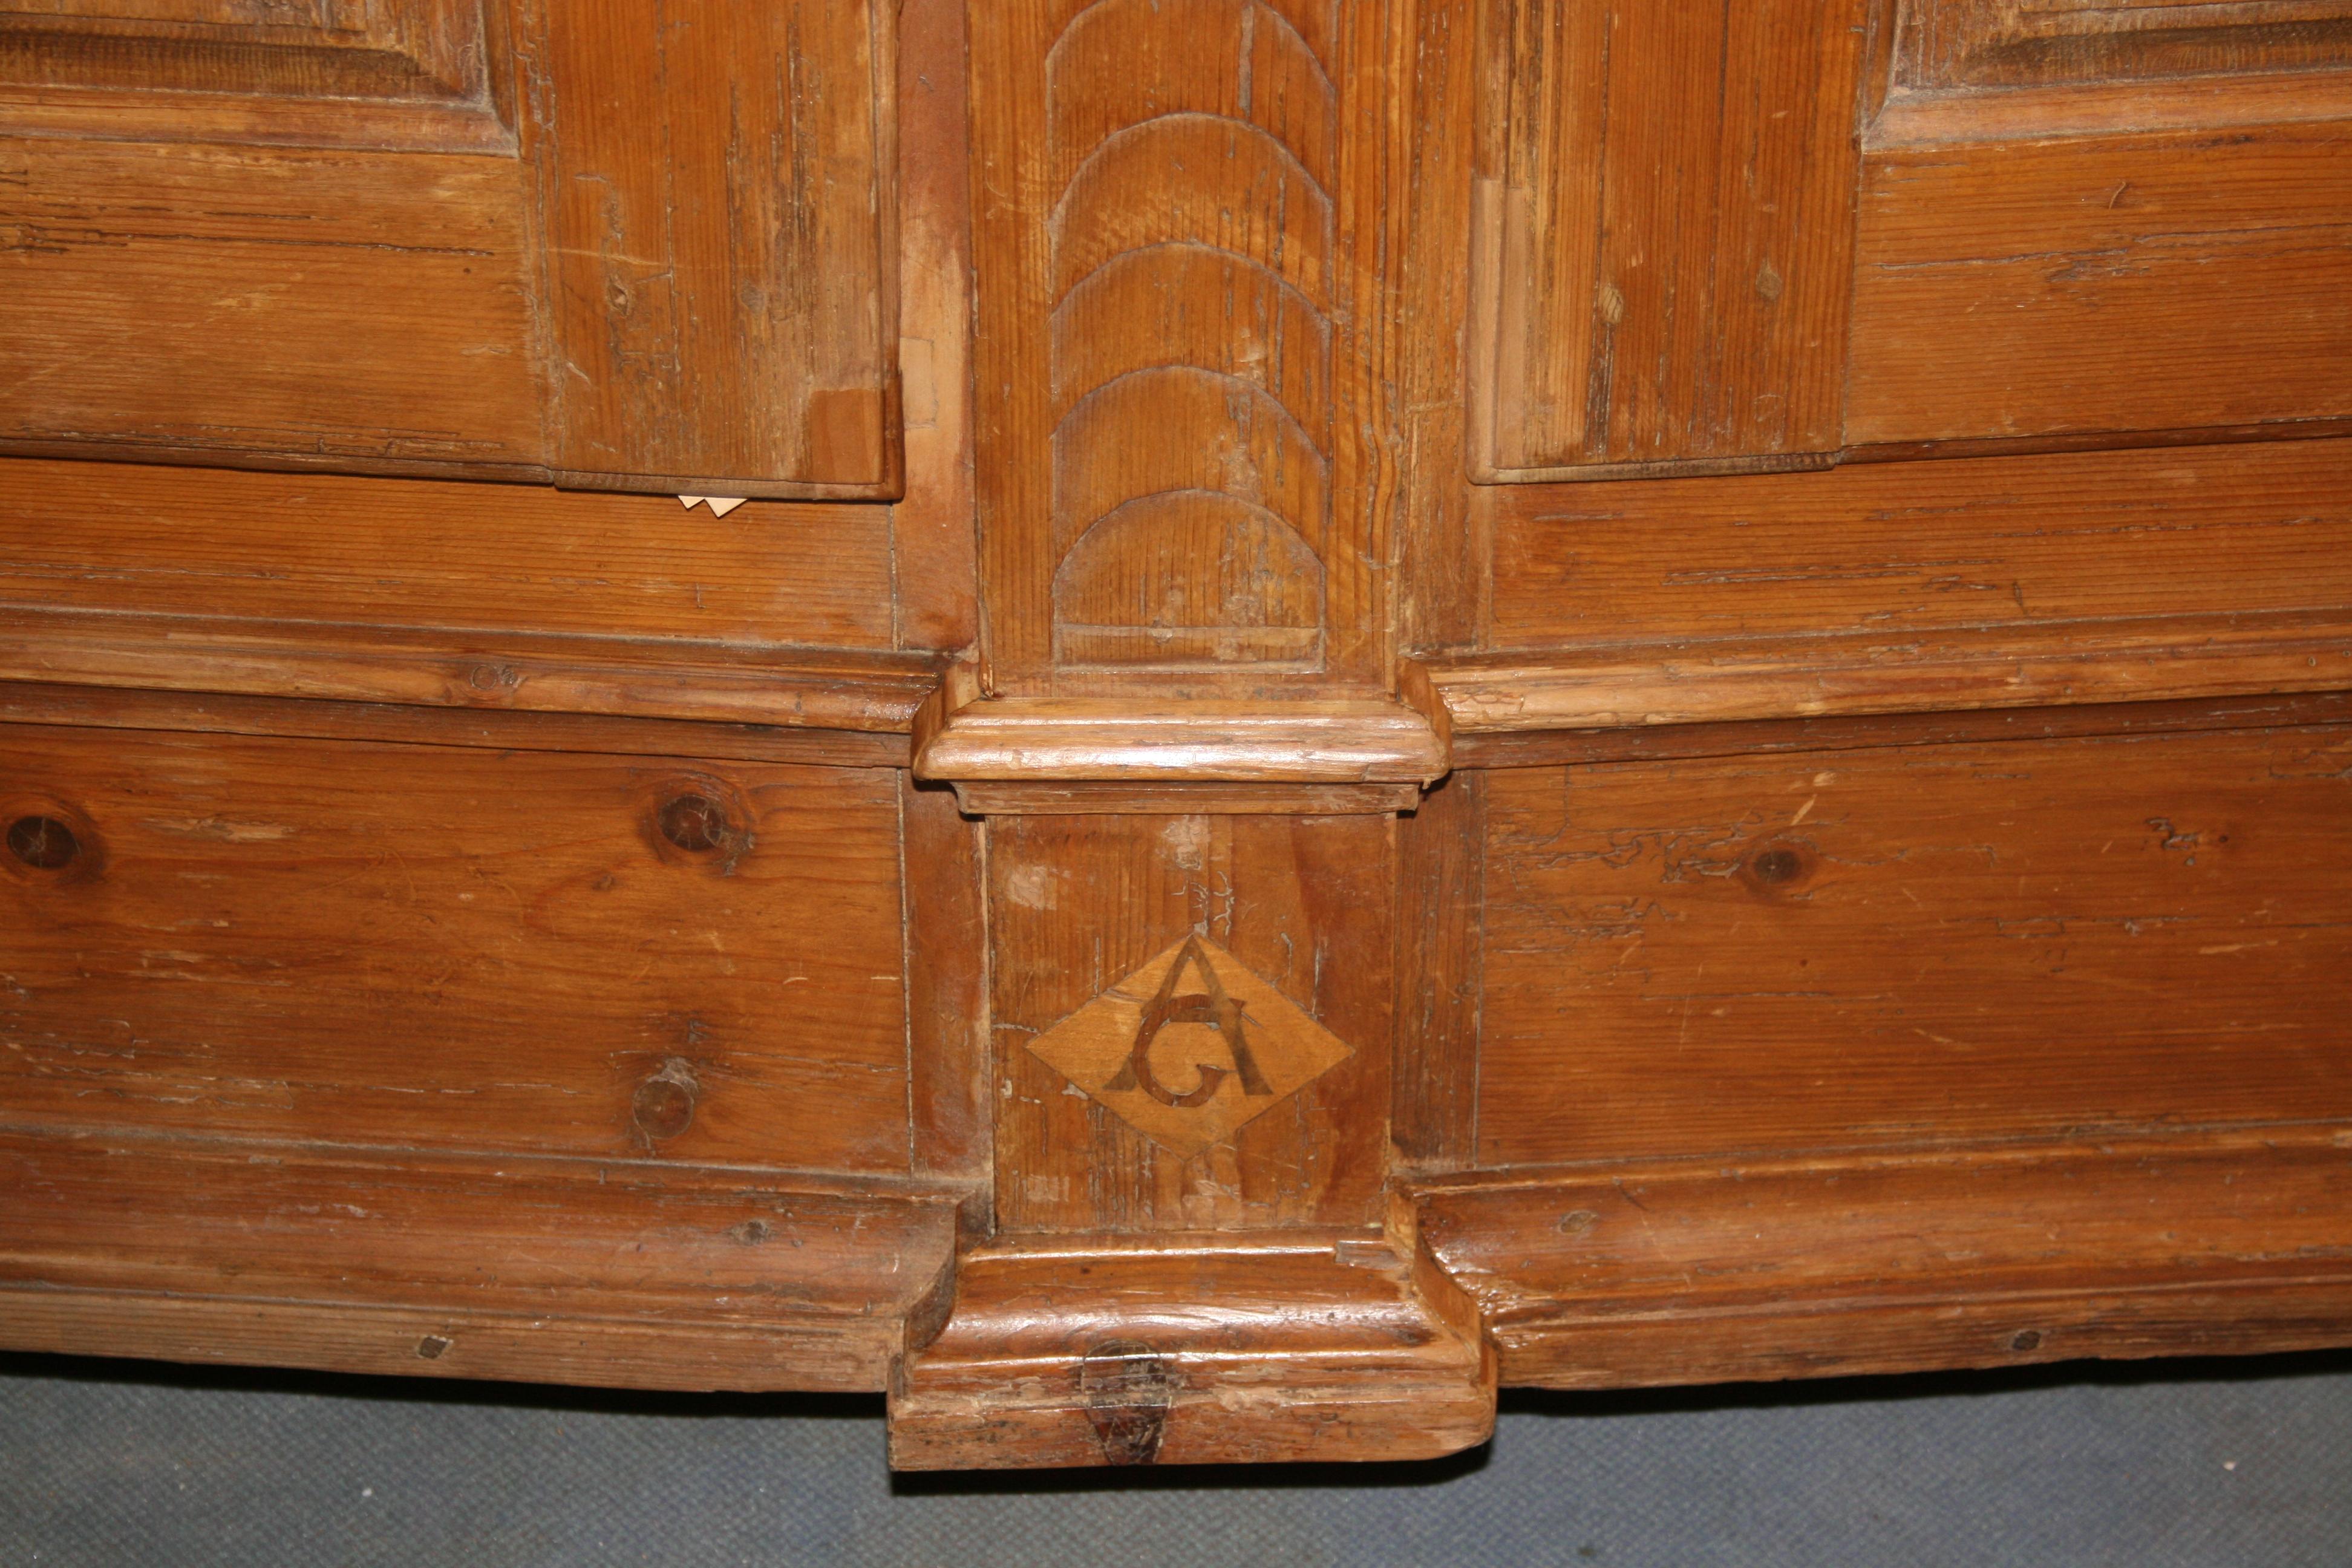 German Baroque Bodensee Armoire, Pine, 18th Century (Holz)